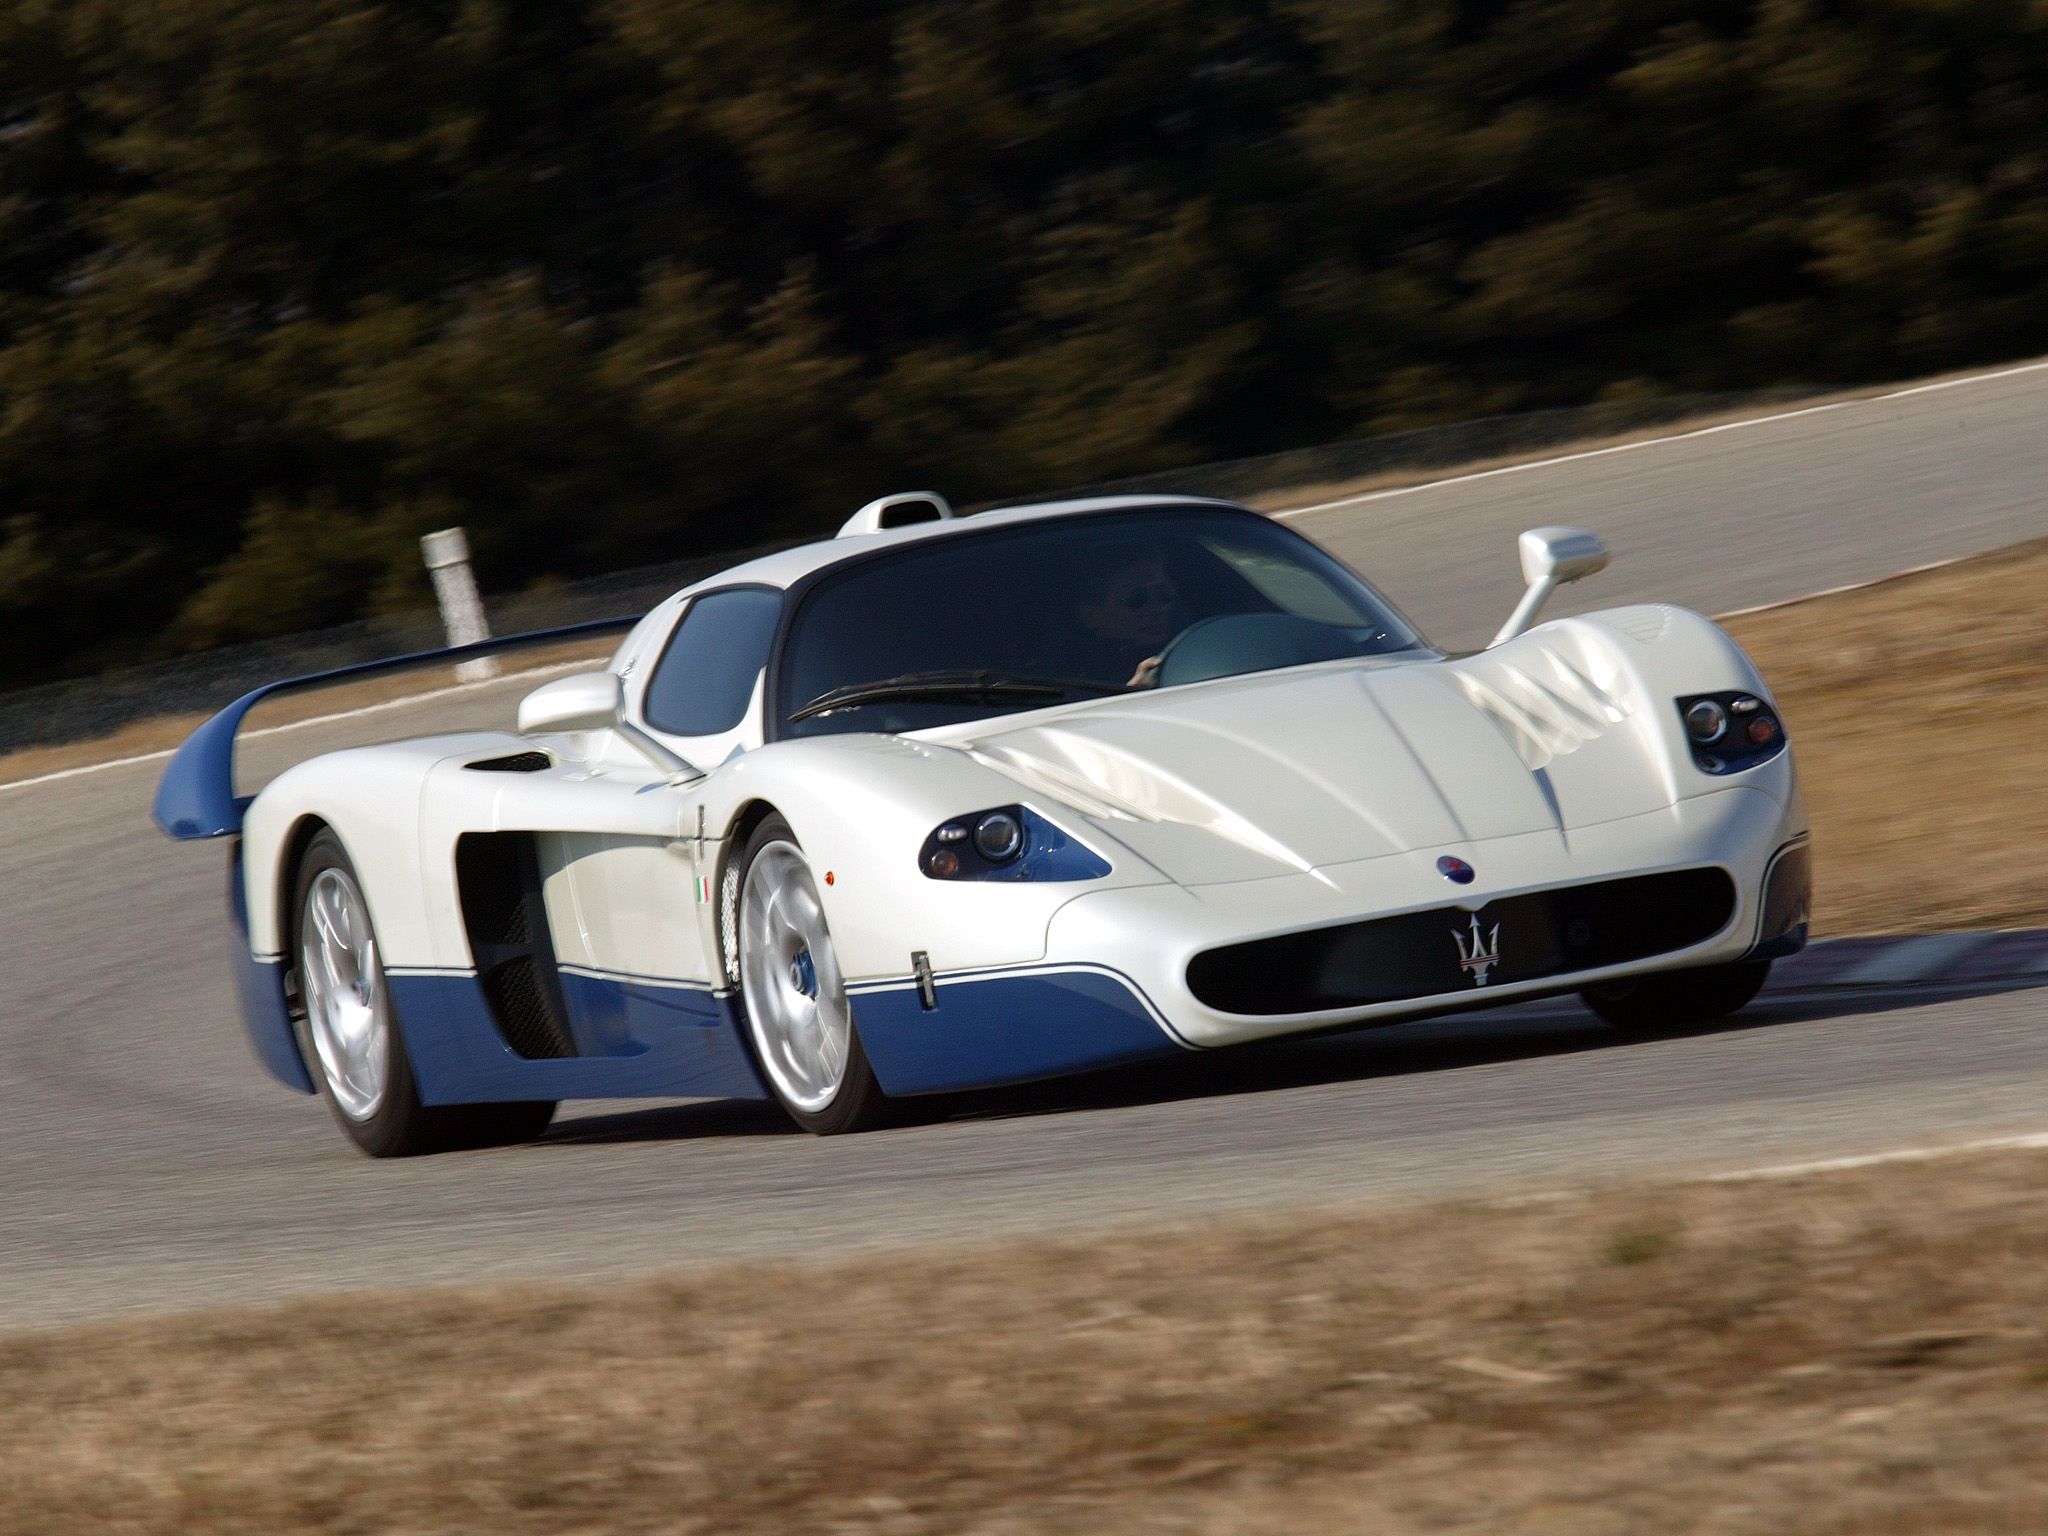 Excited about the new Maserati MC20? Here's All mid-engined Maseratis from the past